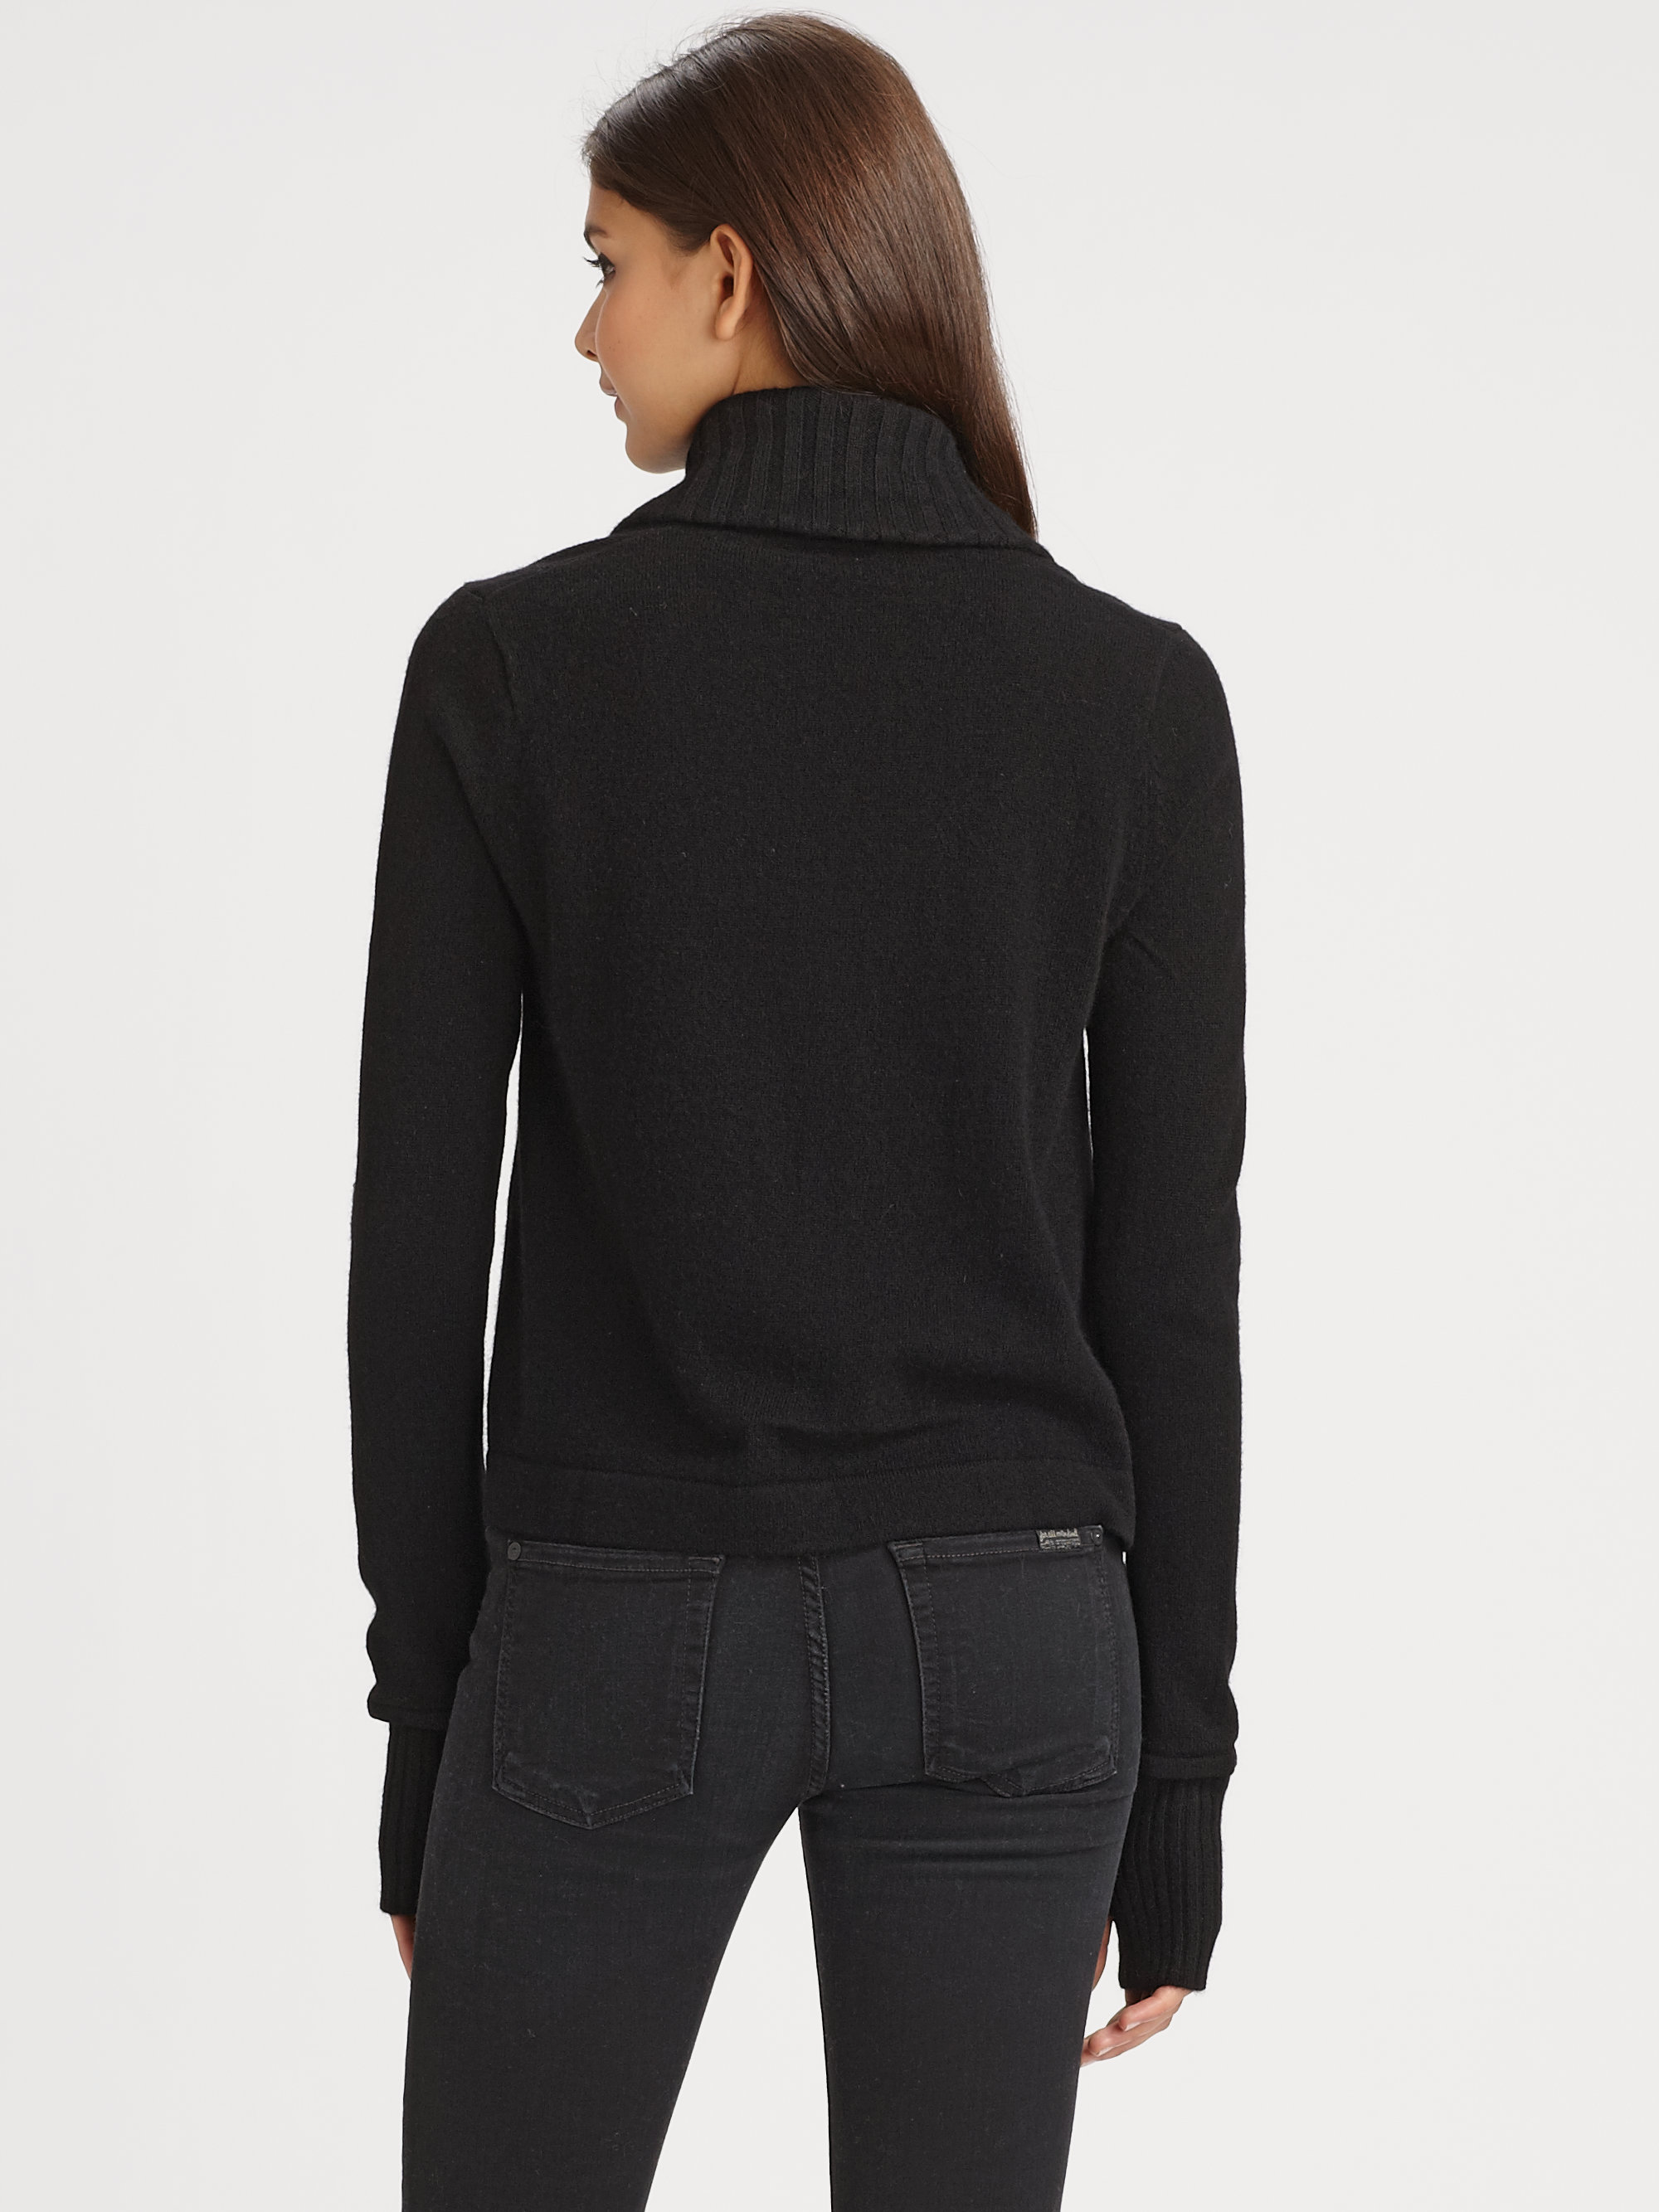 Jamison Cashmere Notched Collar Cardigan in Black | Lyst